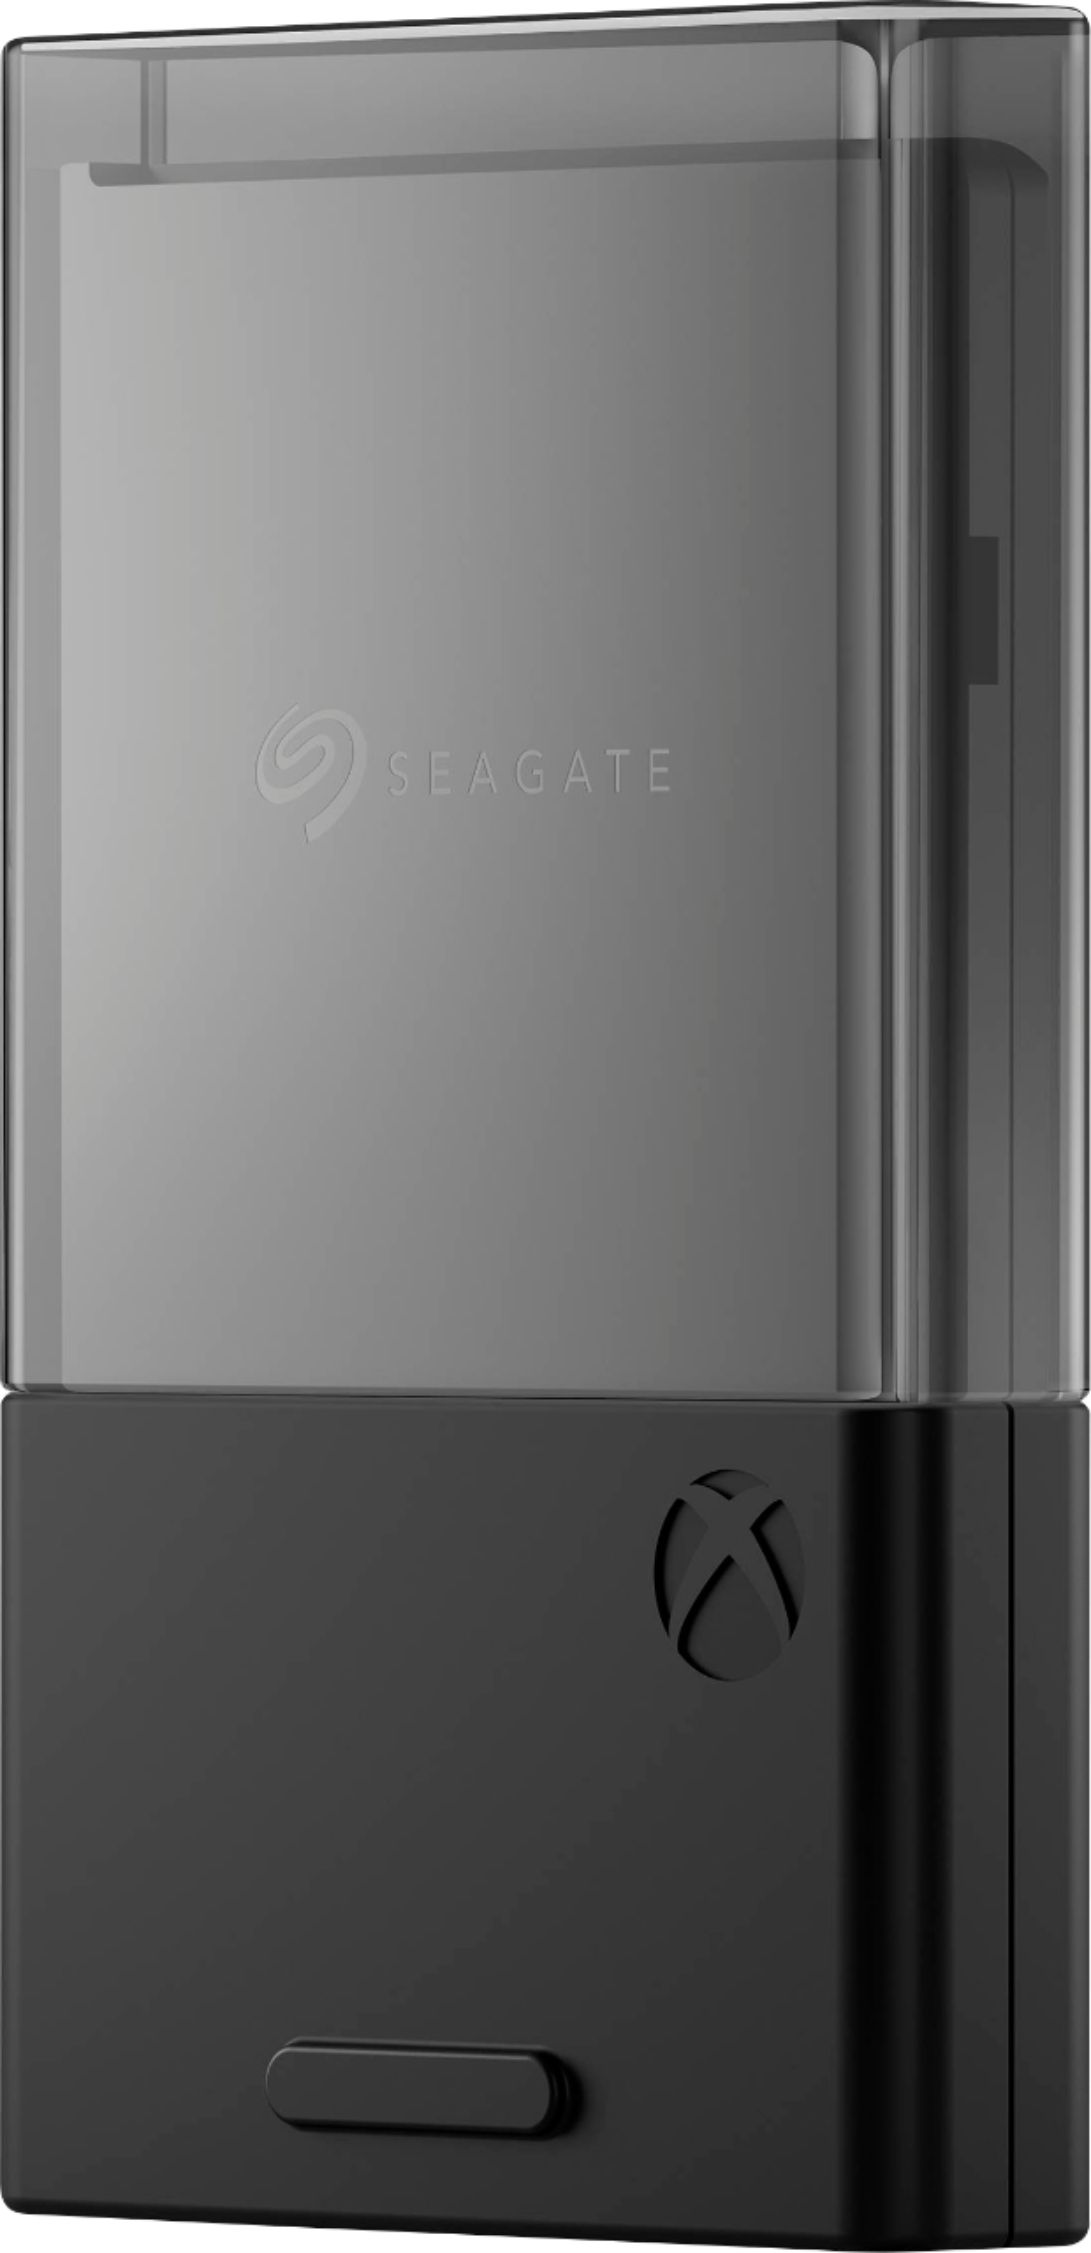 Seagate Storage Expansion Card for Xbox Series X, S